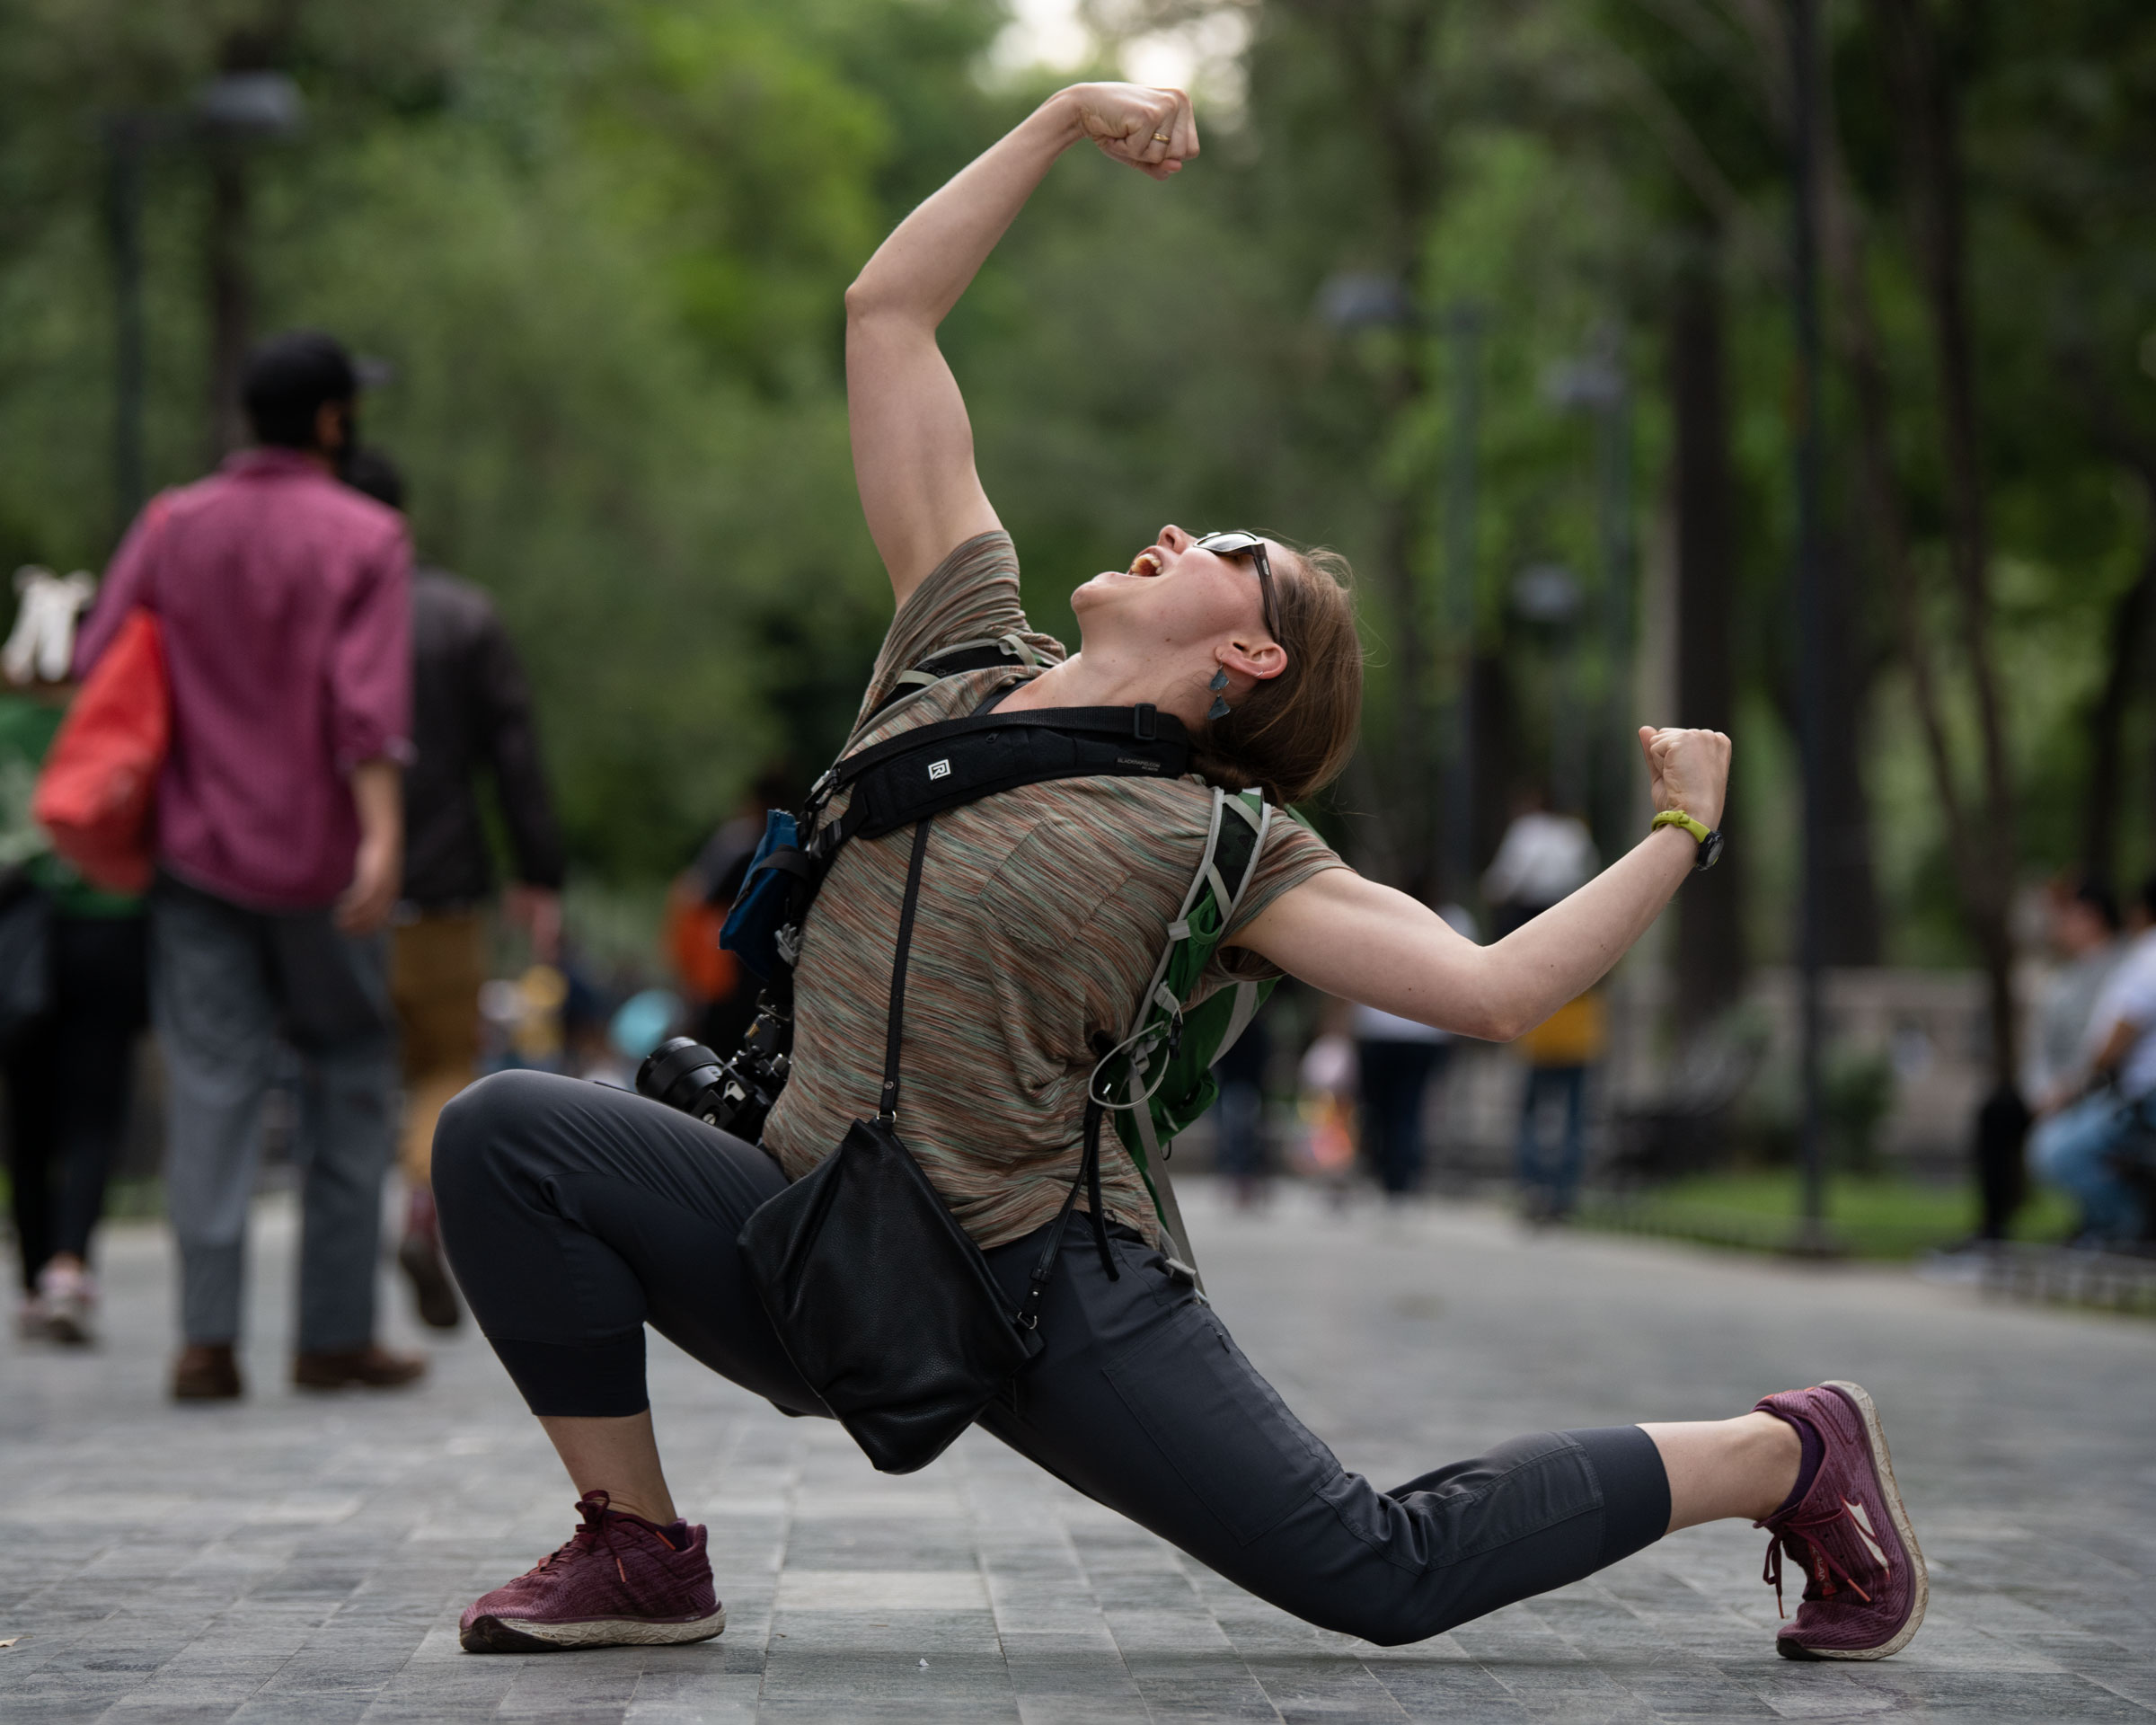 push/FOLD's managing director Holly Shaw flexes her muscles in a long lunge at a Mexico City park carrying many bags | Photography: Jingzi Zhao